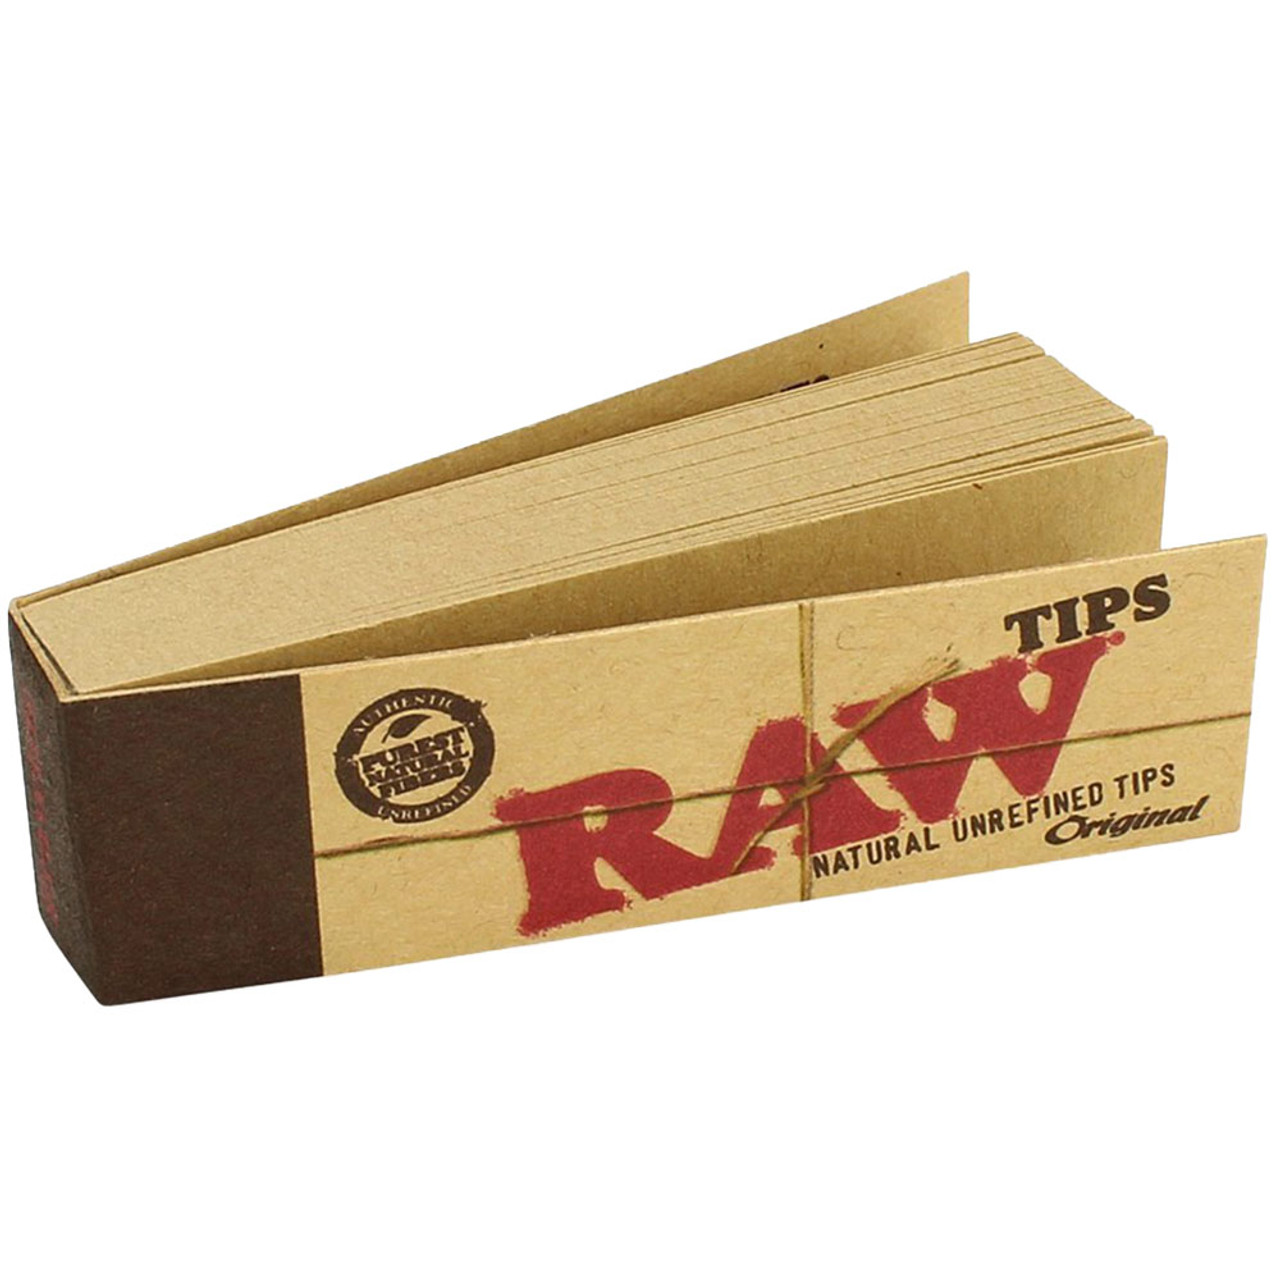 RAW Cone Tips - Natural Unrefined Cone Tips - Original - 24 Pack, Rolling  Papers